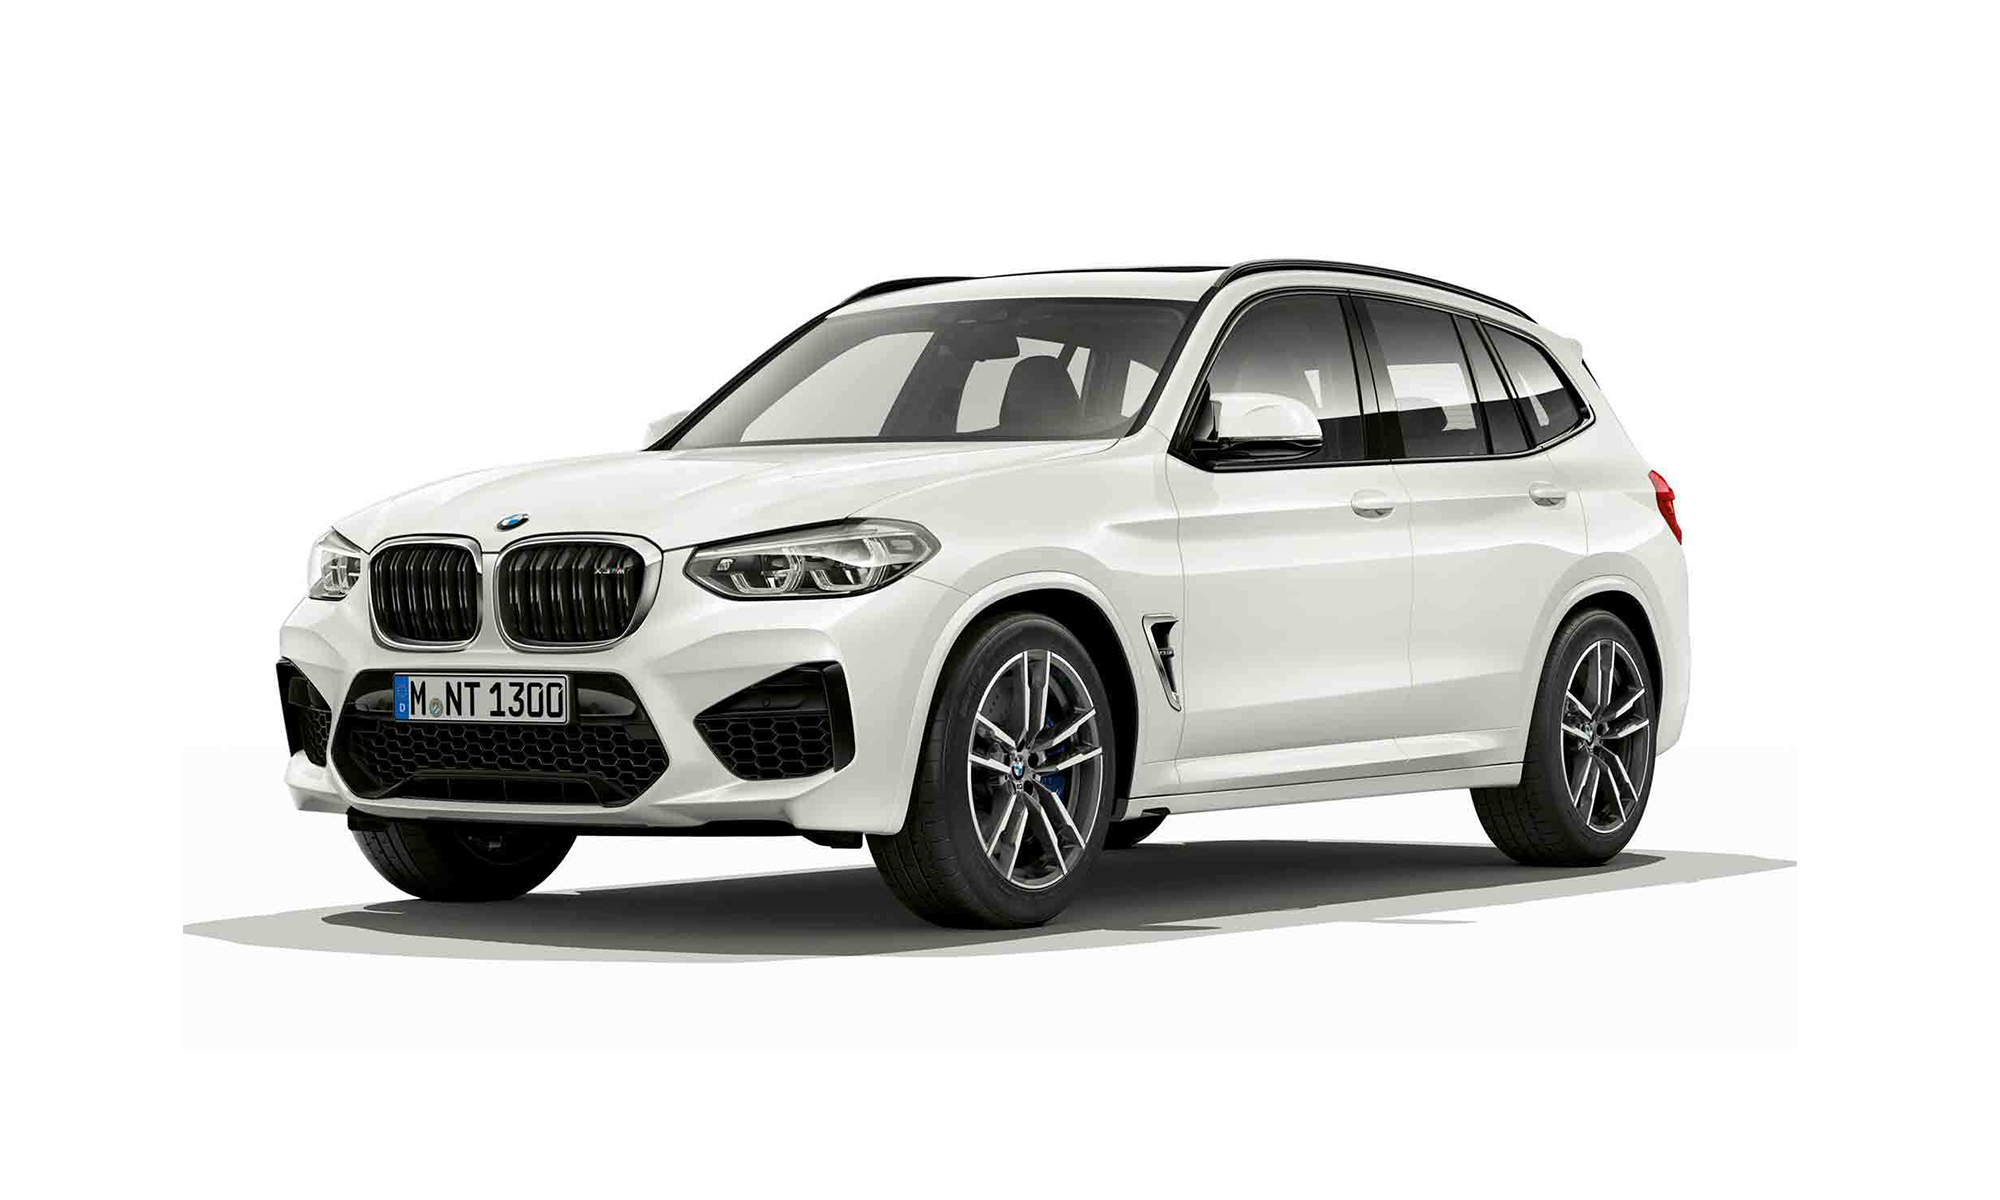 BMW X3 (G01): Models, hybrid, technical data and prices